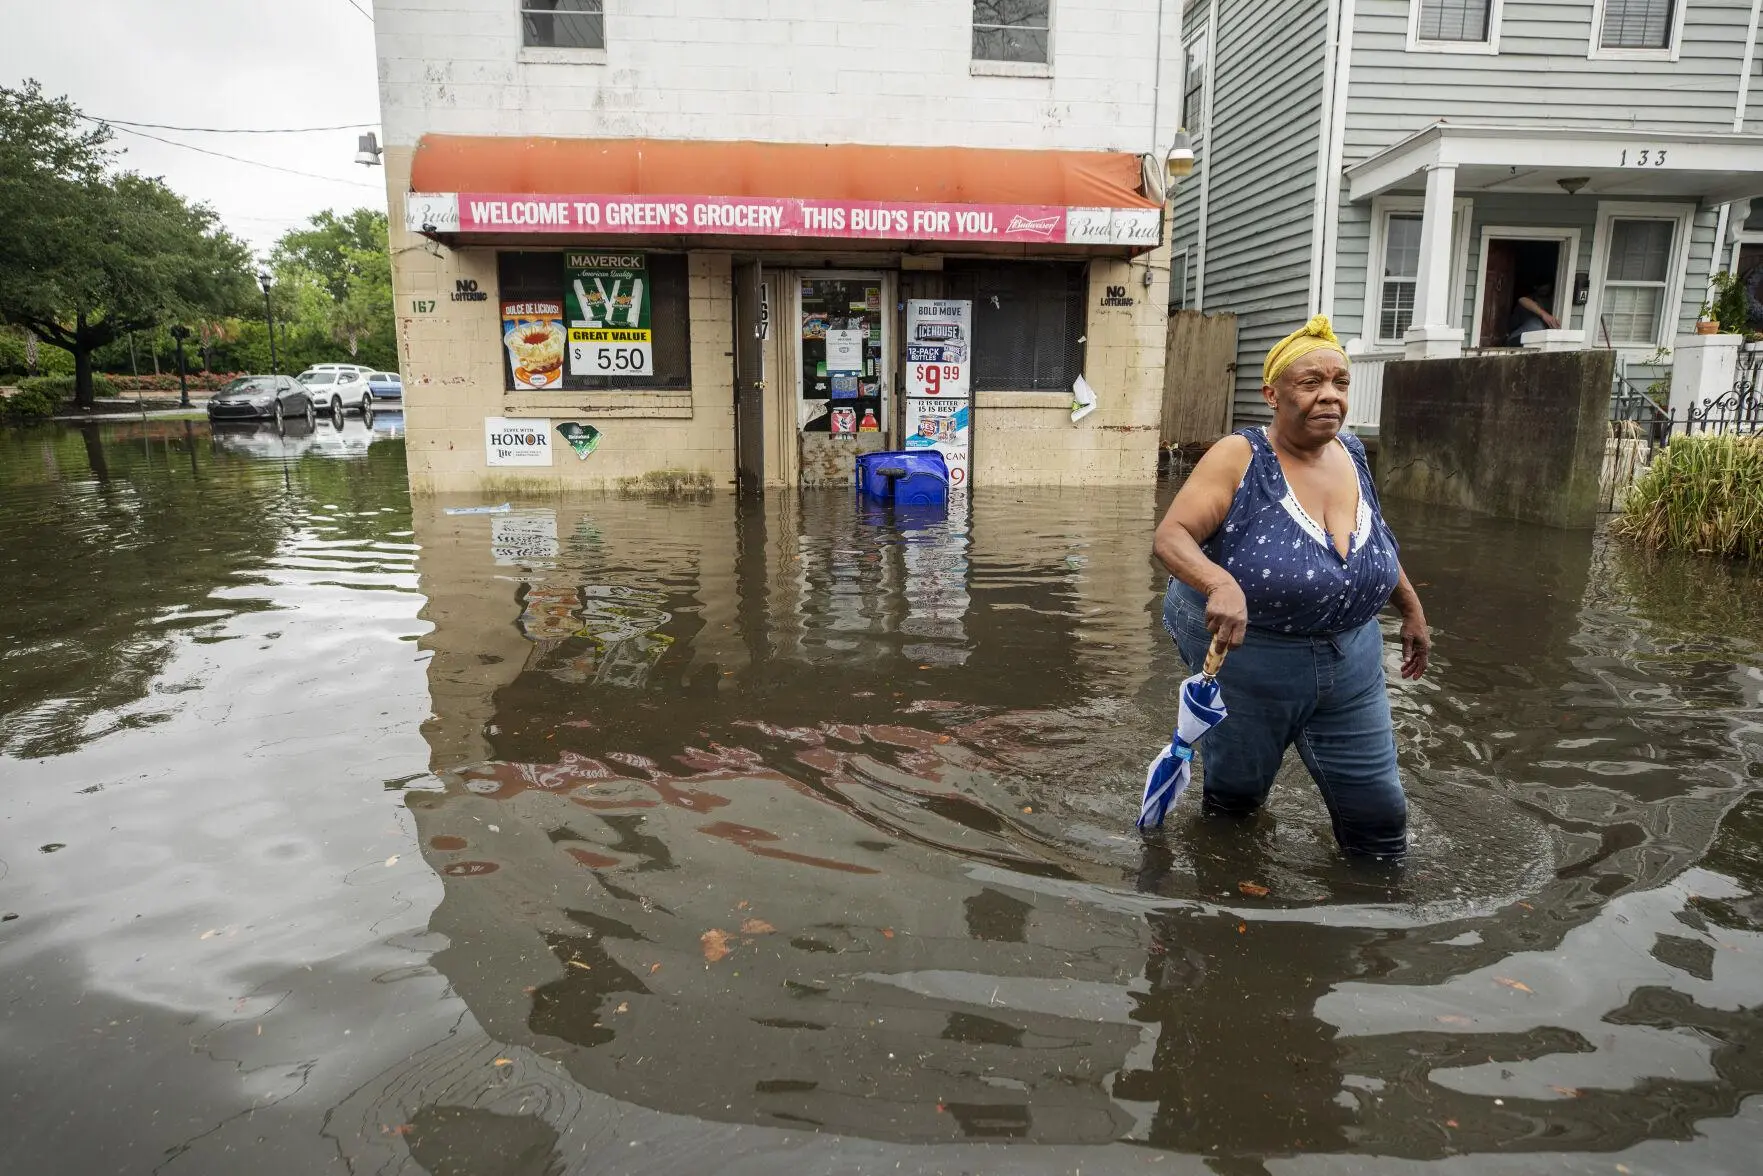 A woman walks through the flood waters in Charleston outside a corner store